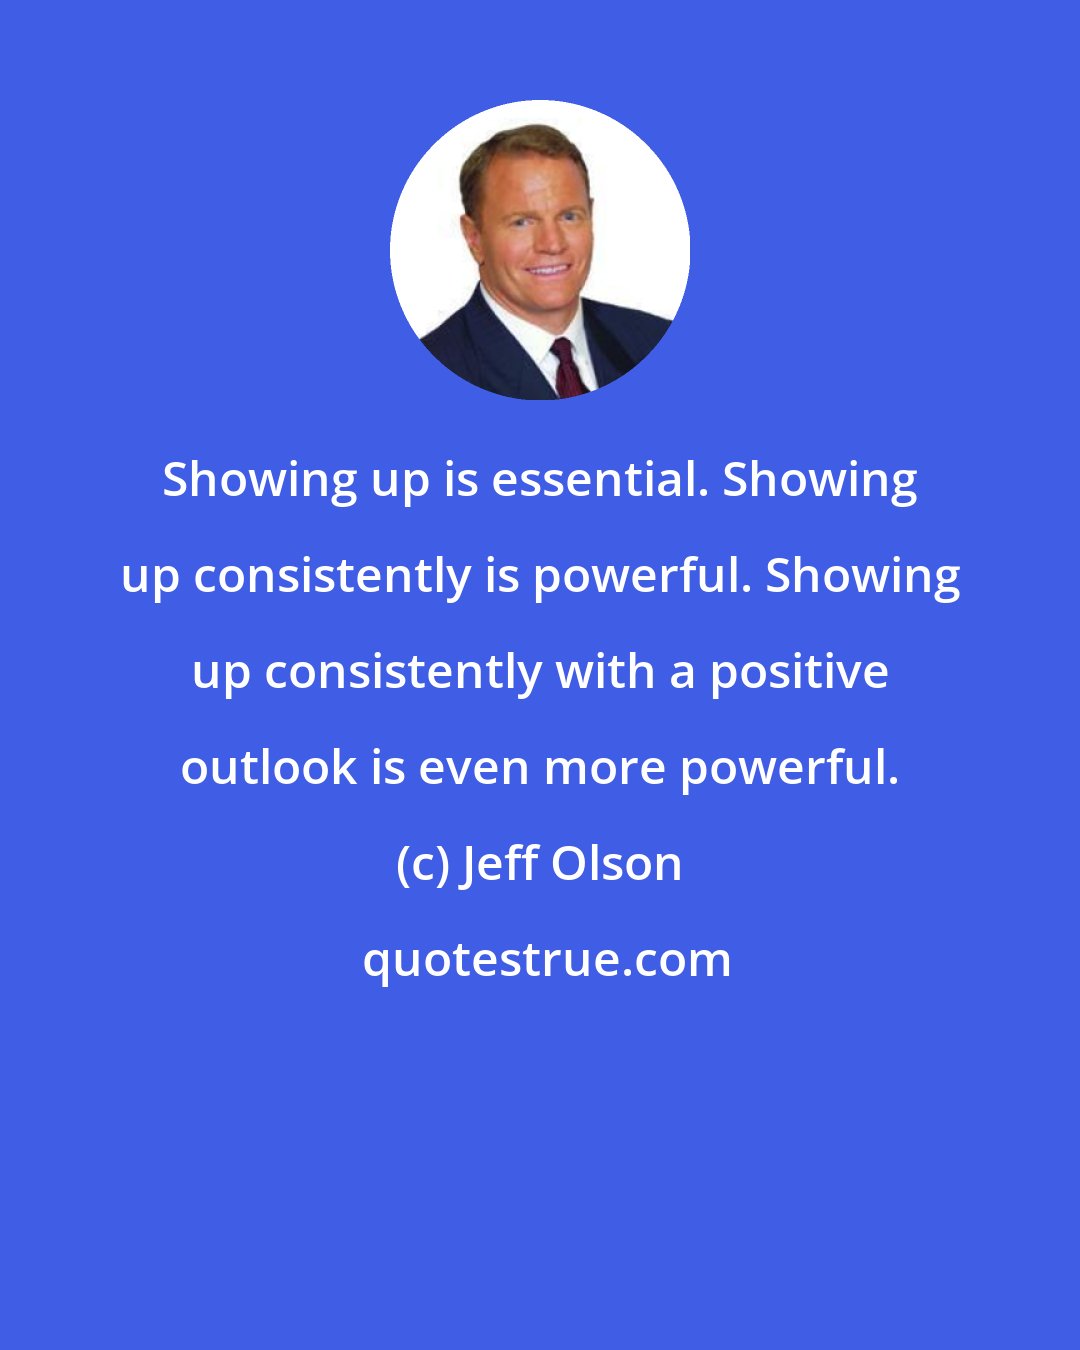 Jeff Olson: Showing up is essential. Showing up consistently is powerful. Showing up consistently with a positive outlook is even more powerful.